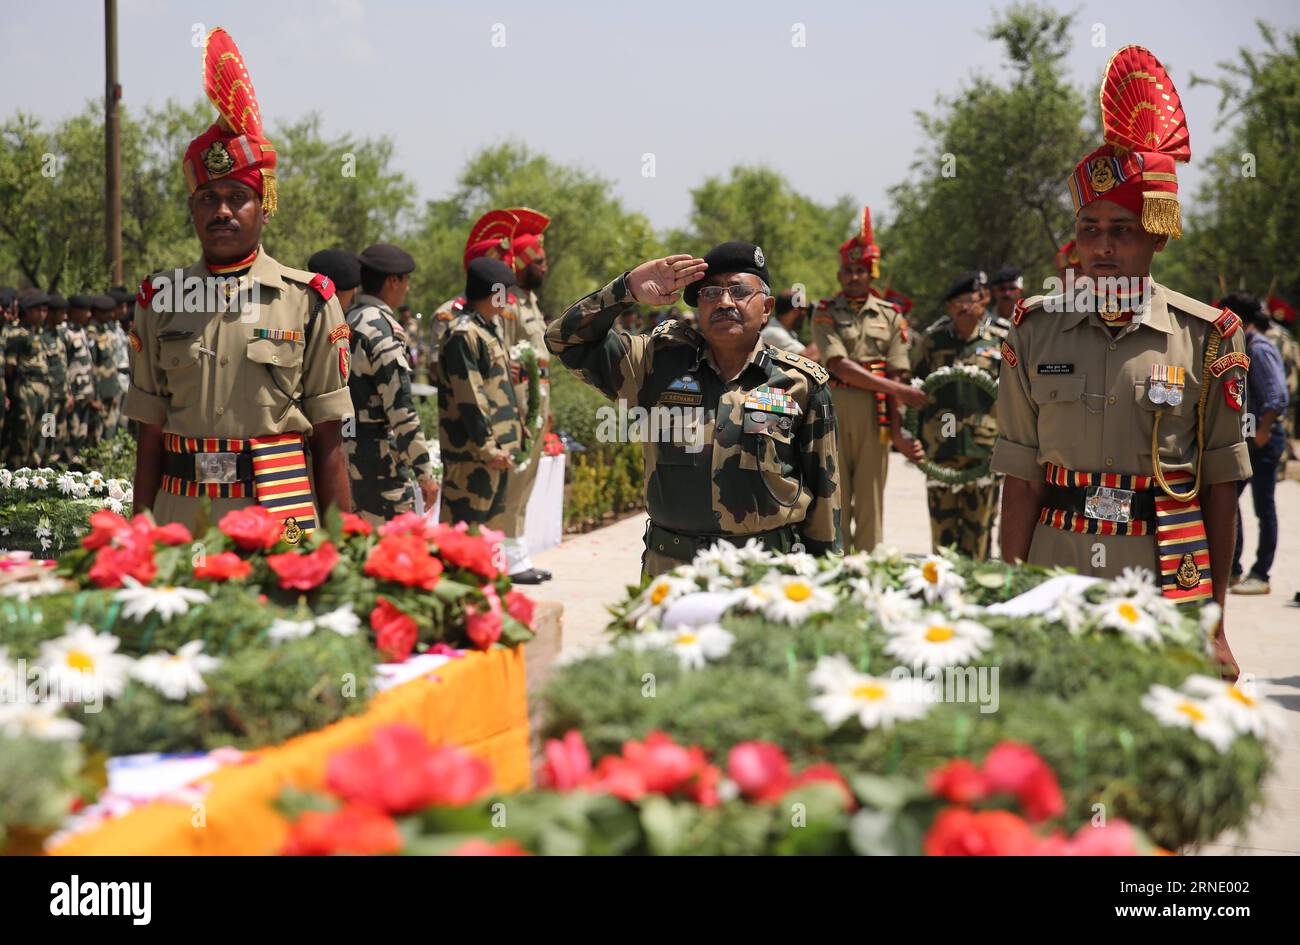 (160604) -- SRINAGAR, June 4, 2016 -- An official of India s Border Security Force (BSF) salutes to coffins of slain border guards during a wreath laying ceremony at a BSF camp in the outskirts of Srinagar, summer capital of Indian-controlled Kashmir, June 4, 2016. The militant attack on convoy of India s Border Security Force (BSF) on Friday left three border guards dead and nine others wounded, two of them critically, in restive Indian-controlled Kashmir, officials said. ) (cyc) INDIA-KASHMIR-SRINAGAR-MILITANT ATTACK JavedxDar PUBLICATIONxNOTxINxCHN   160604 Srinagar June 4 2016 to Official Stock Photo